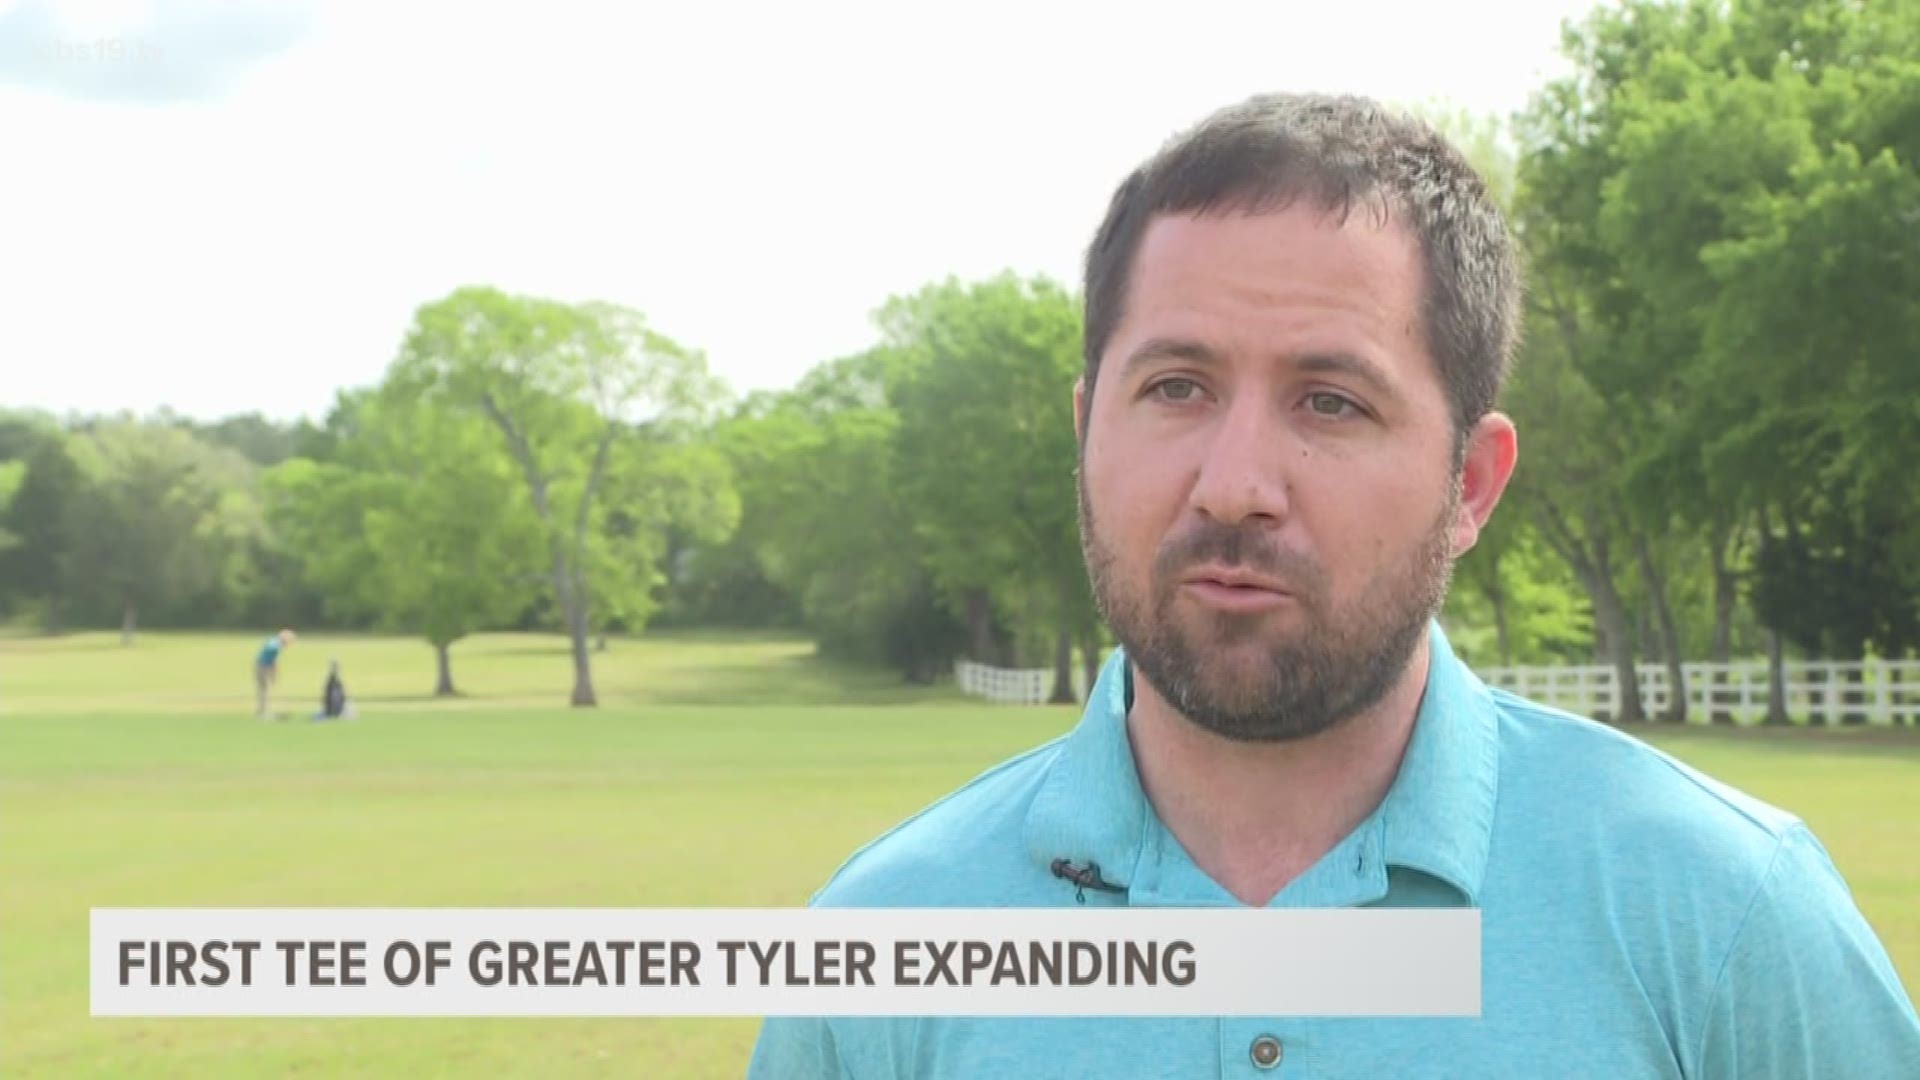 The First Tee of Greater Tyler is expanding and will be building golf courses in North Tyler.